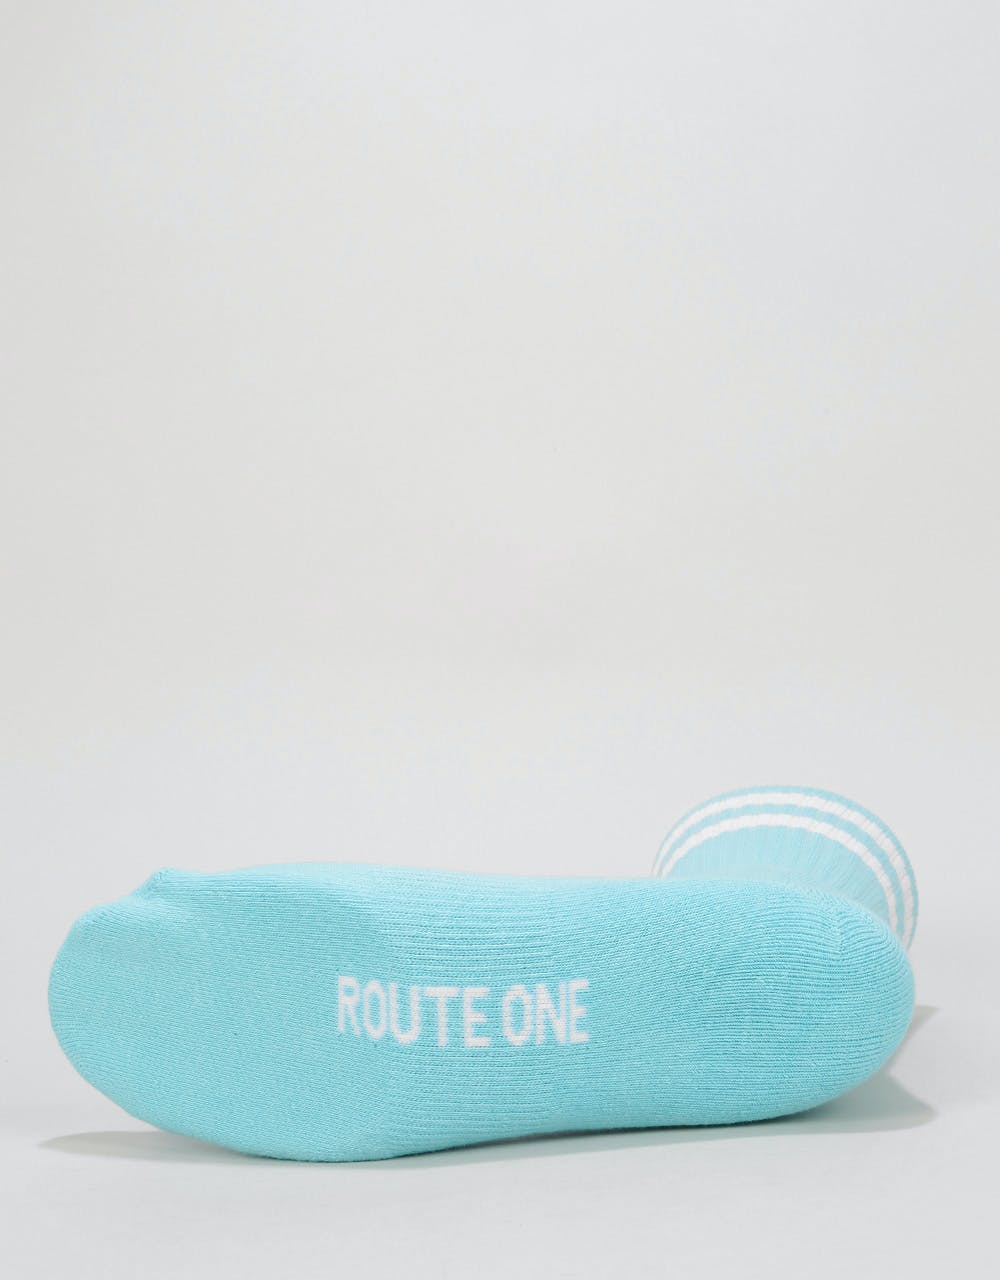 Route One Classic Crew Socks - Pastel Blue/White